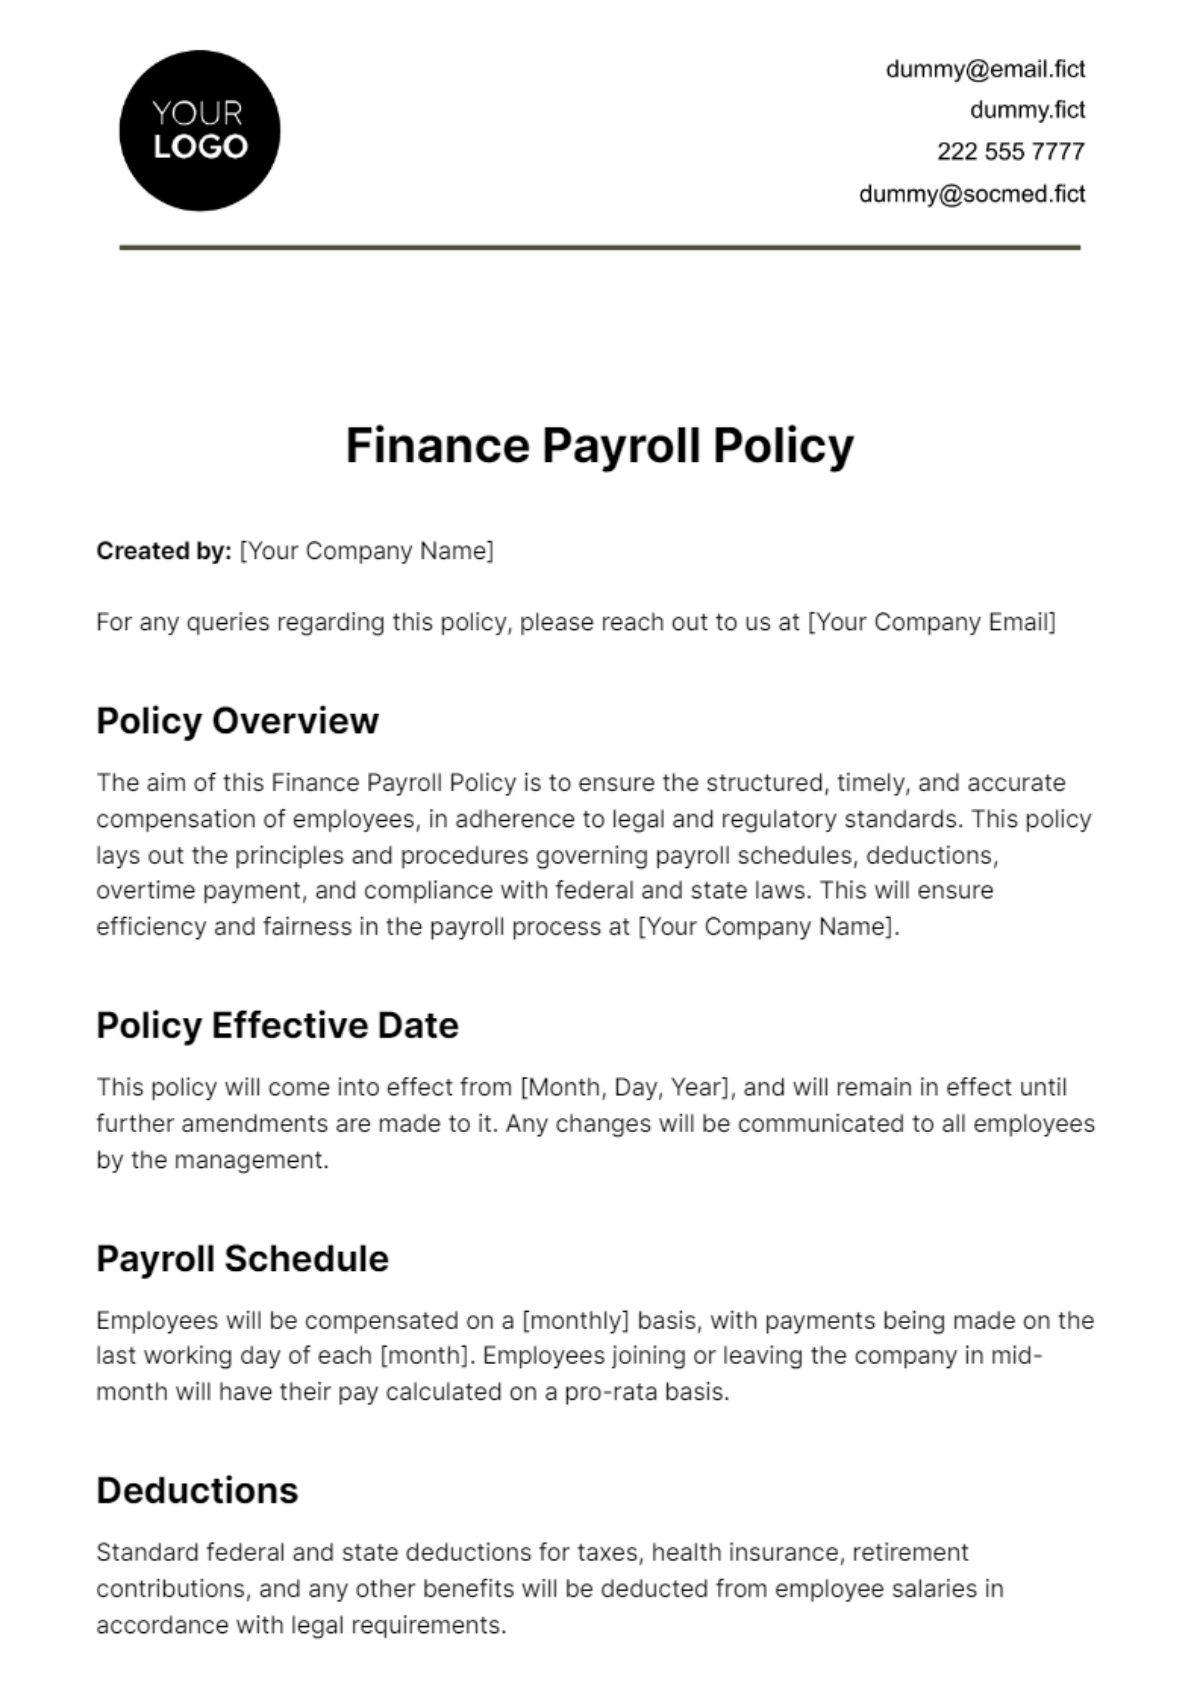 Finance Payroll Policy Template